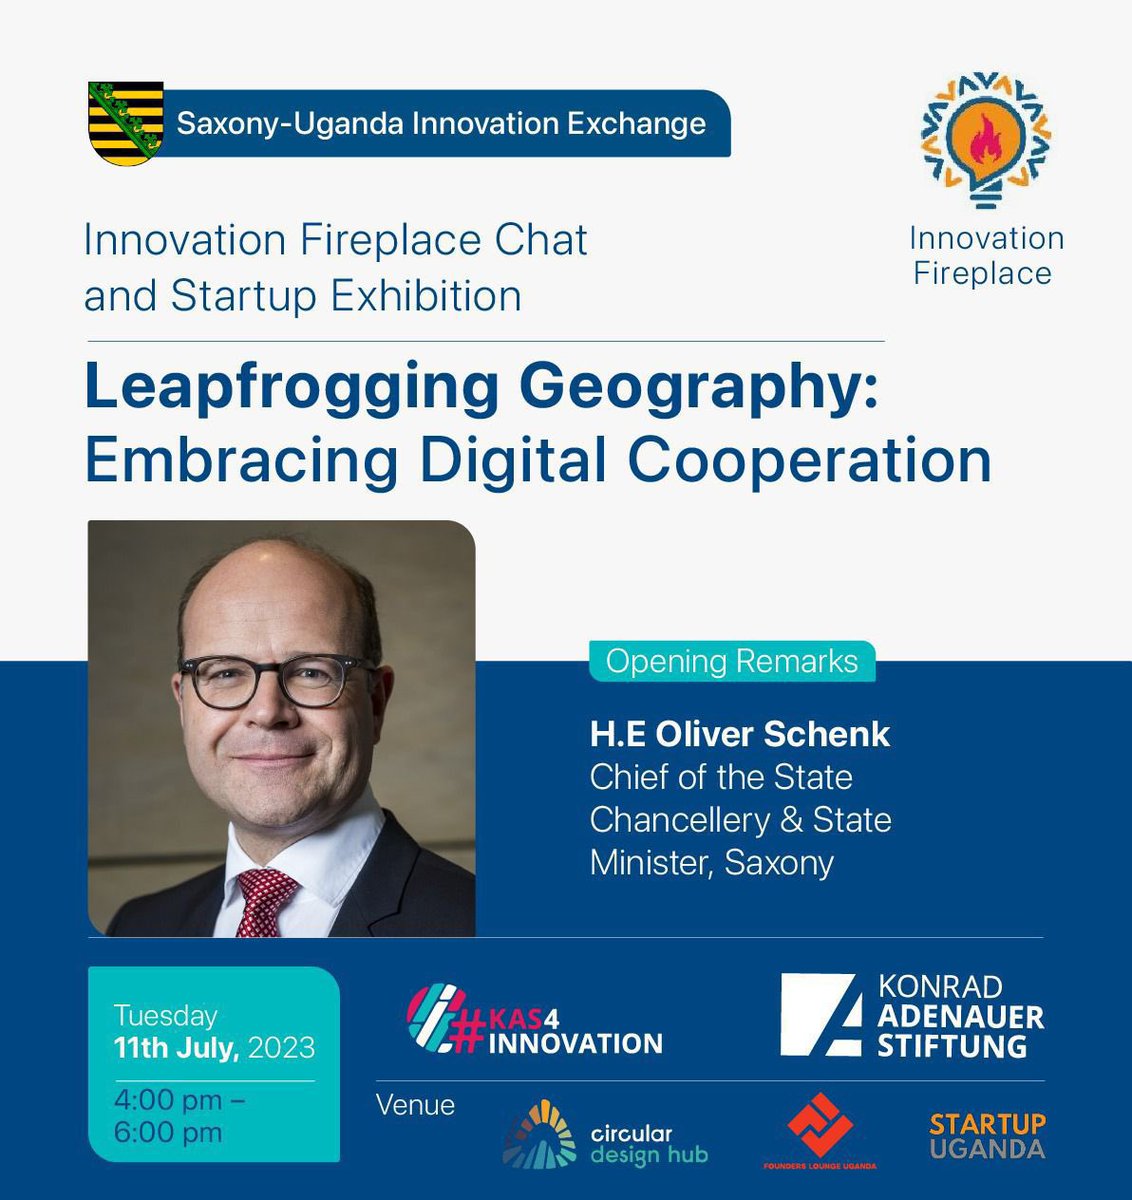 Saxony-Uganda Innovation Exchange.
Innovation Fireplace Chat and Startup Exhibition:

Embracing Digital Cooperation

Tue 11th July, 2023
4:00 PM - 6:00 PM
📍Circular Design Hub

#KAS4Innovation